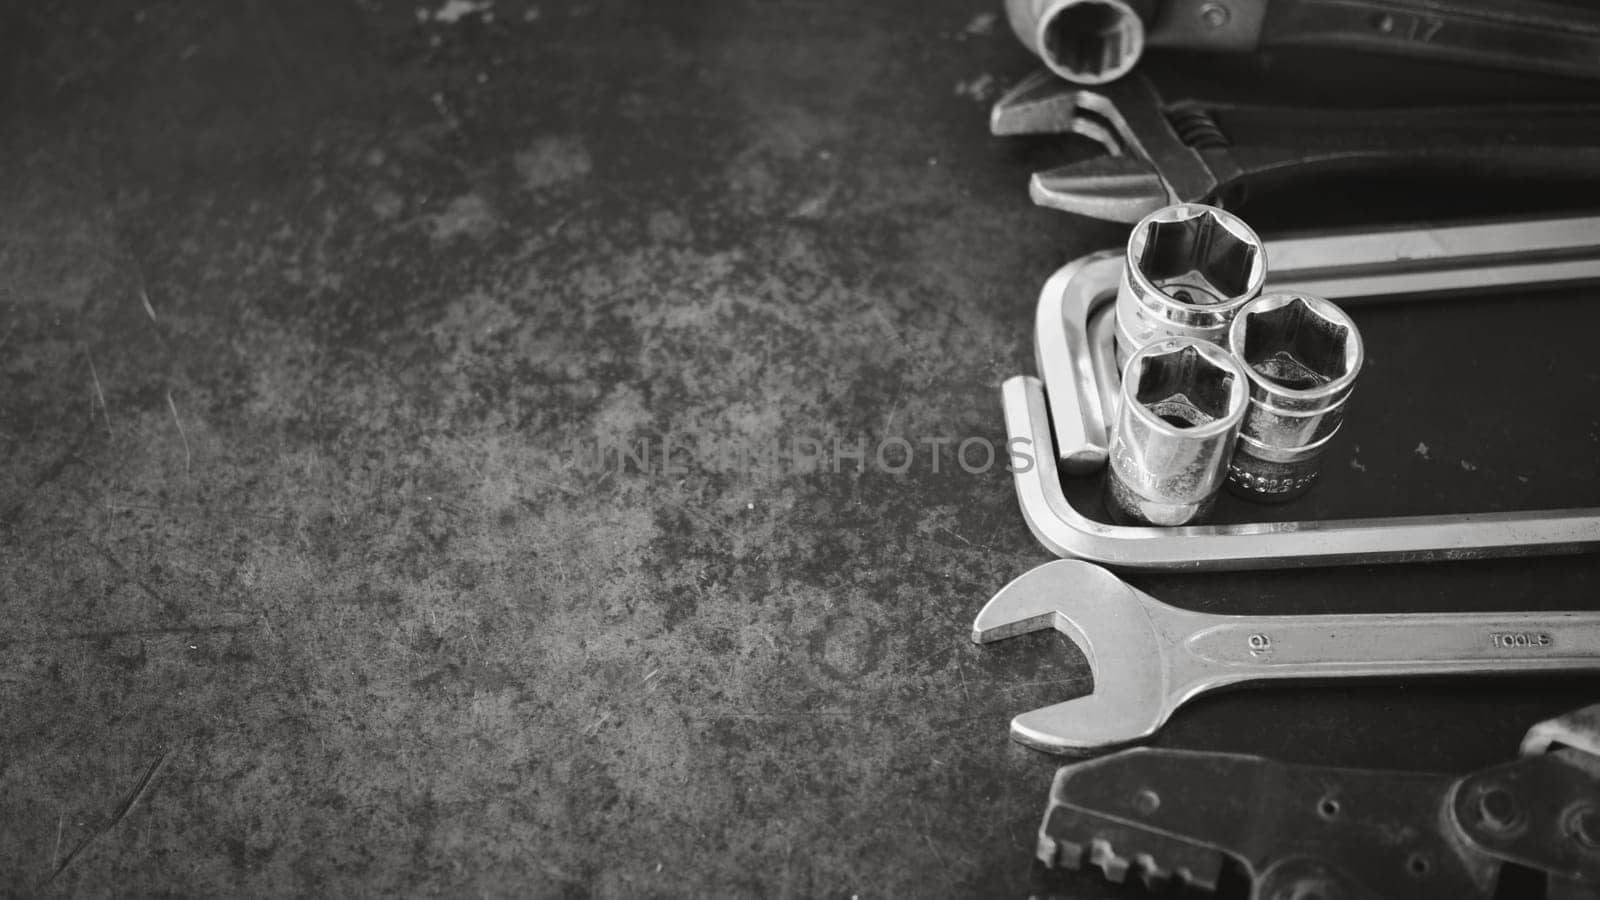 Hand tools consisting of wrenches, pliers, socket wrenches, laid out on old steel plate background. by Unimages2527